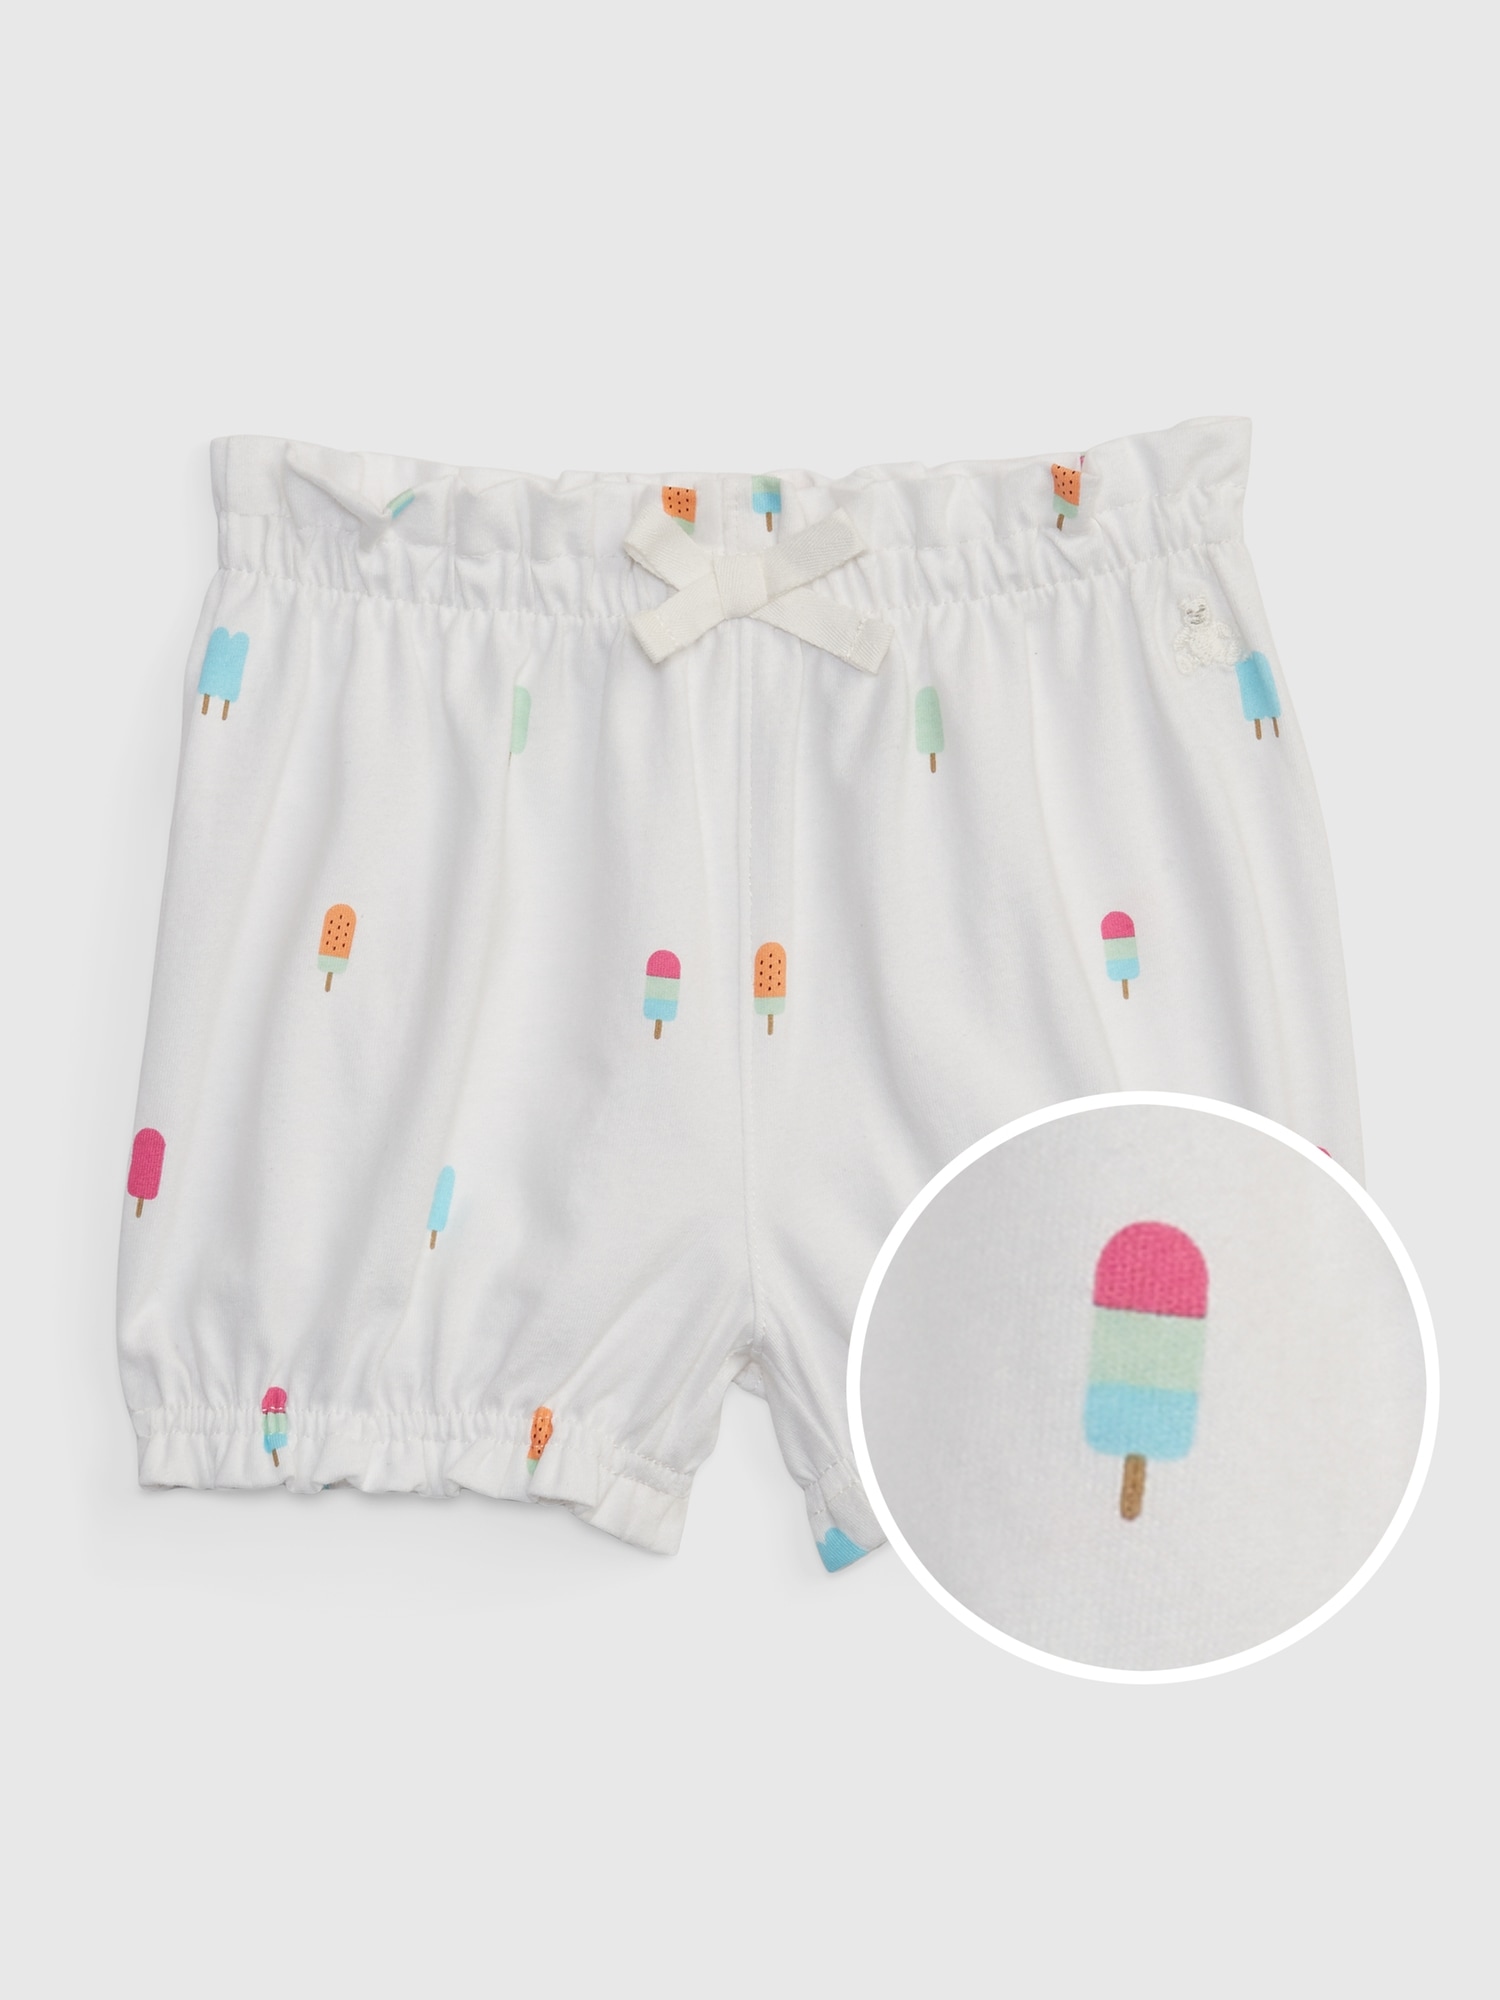 Baby Organic Cotton Mix and Match Pull-On Shorts